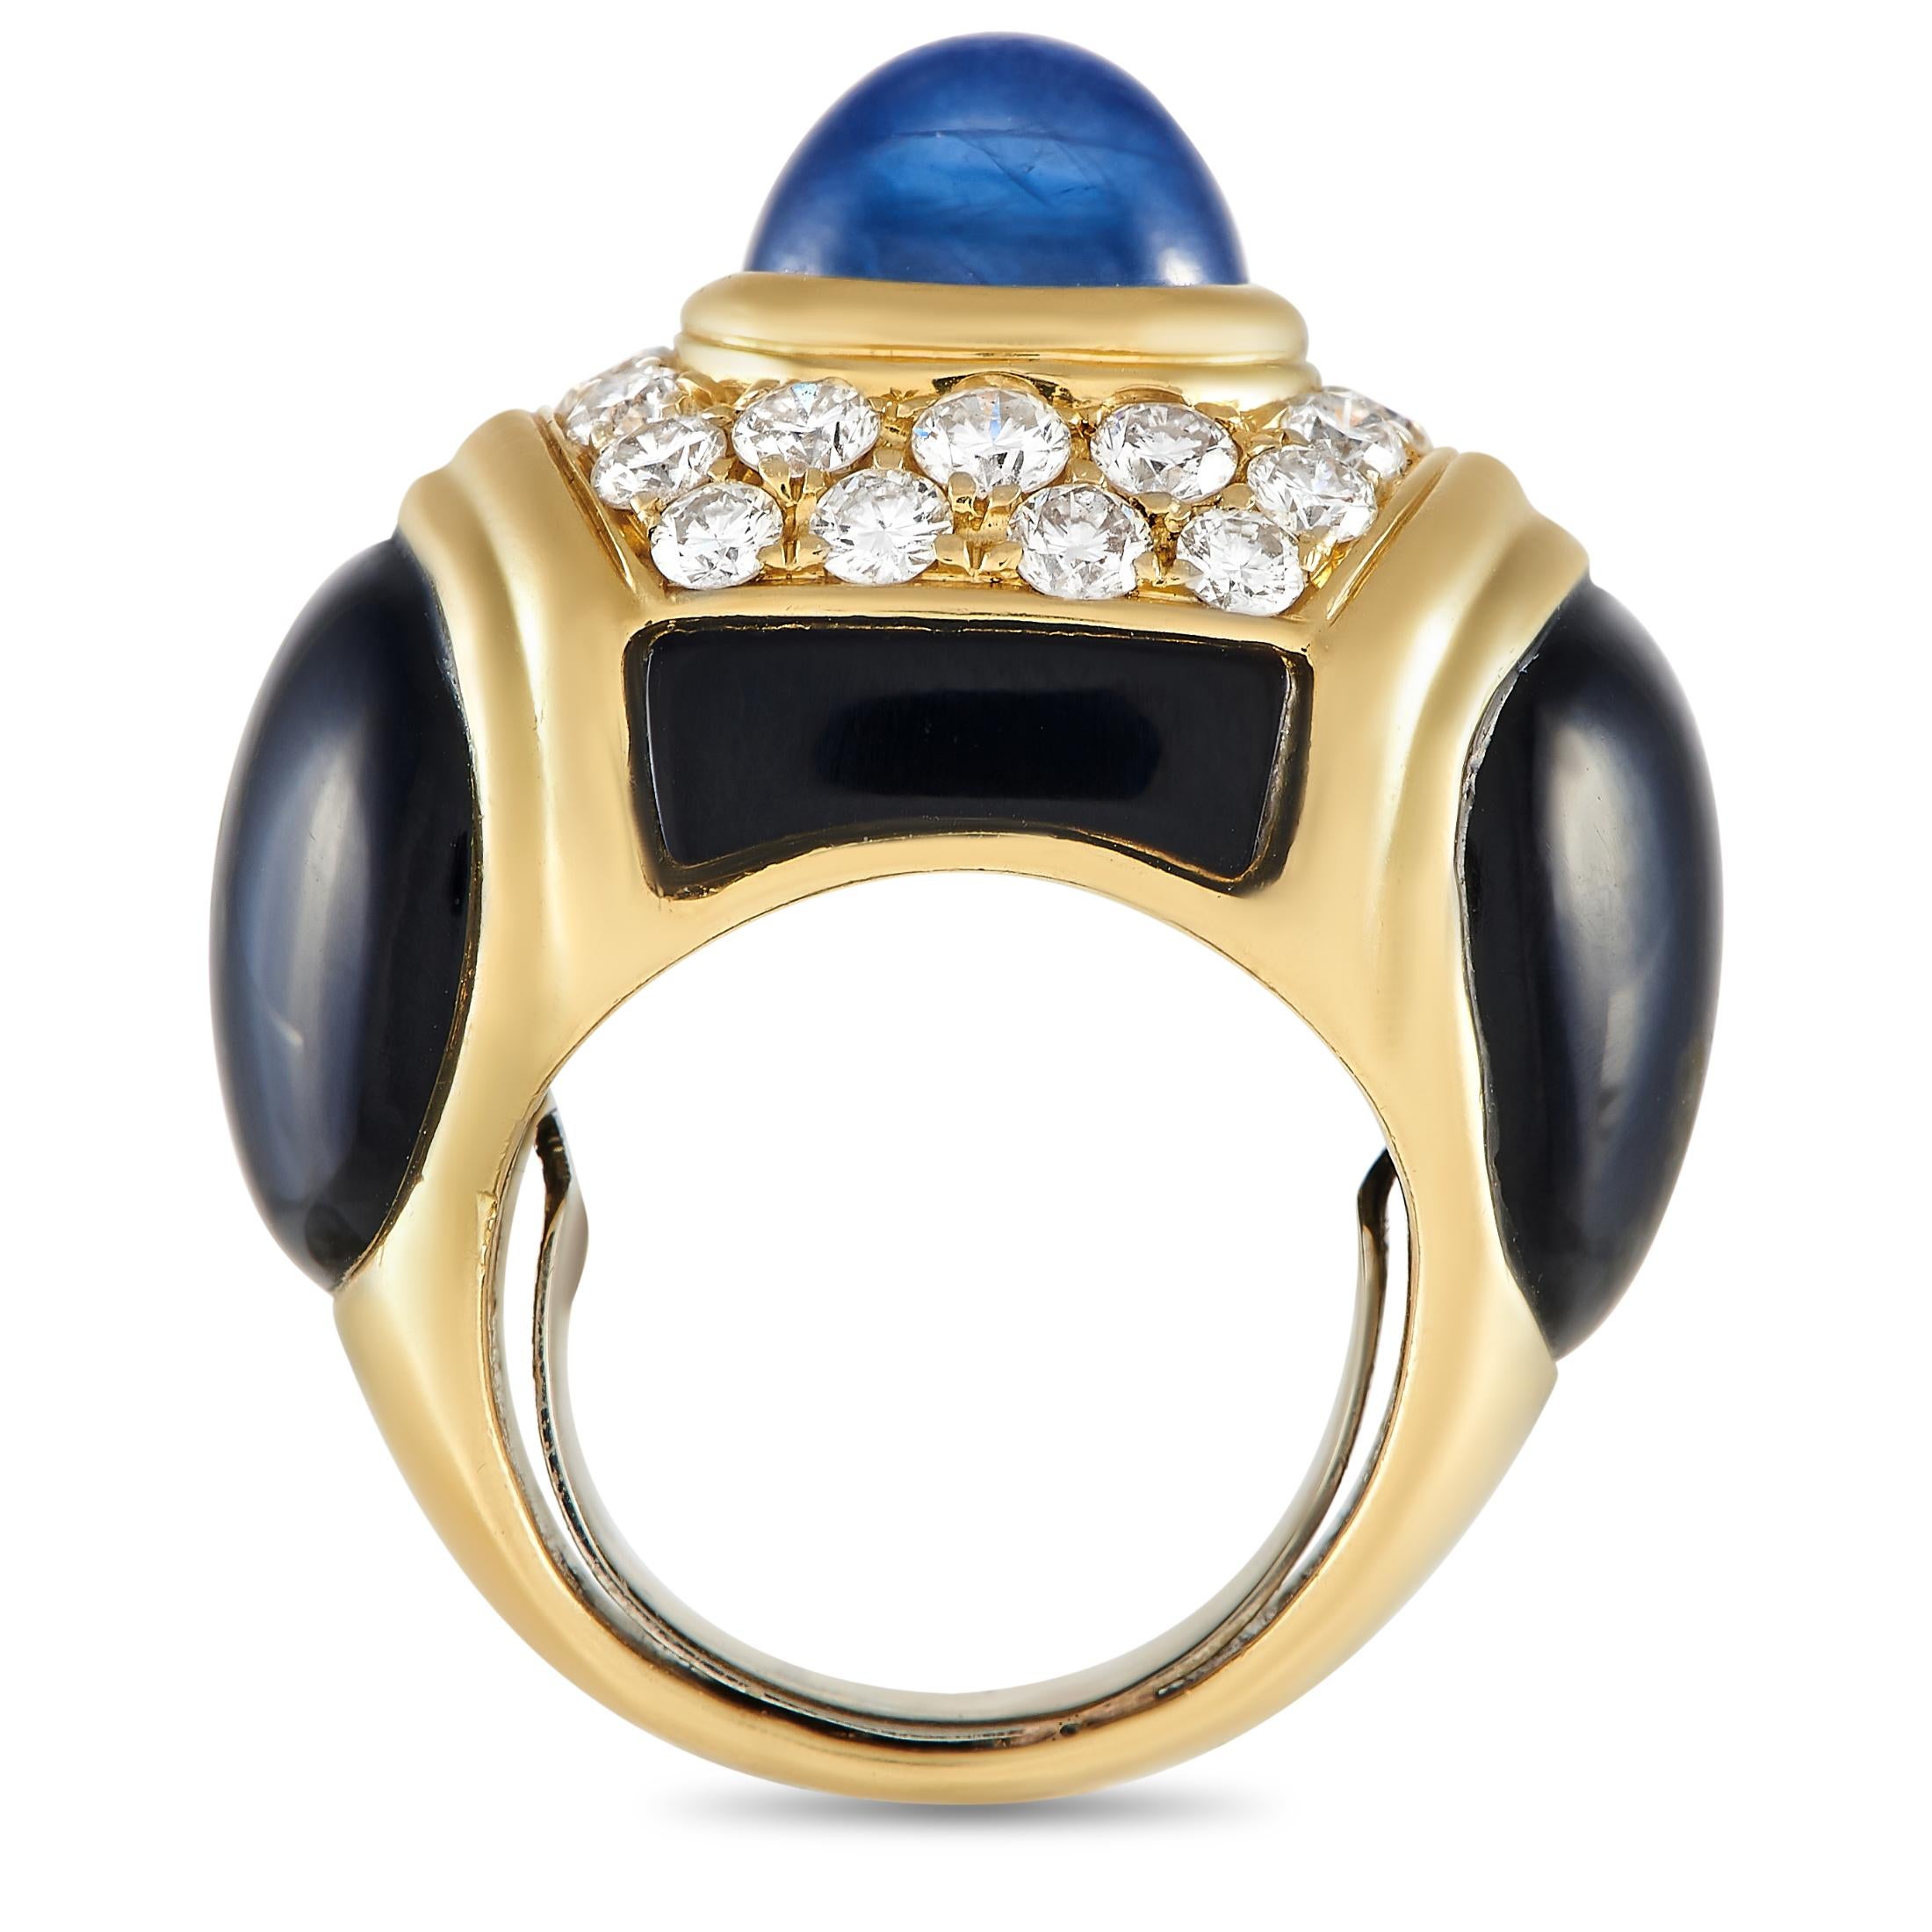 Up your accessorizing style with the pronounced beauty of this cocktail ring. The chunky ring is made from 18K yellow gold and features a combination of diamonds that total 1.25 carats, onyx, and a blue sapphire cabochon top that totals